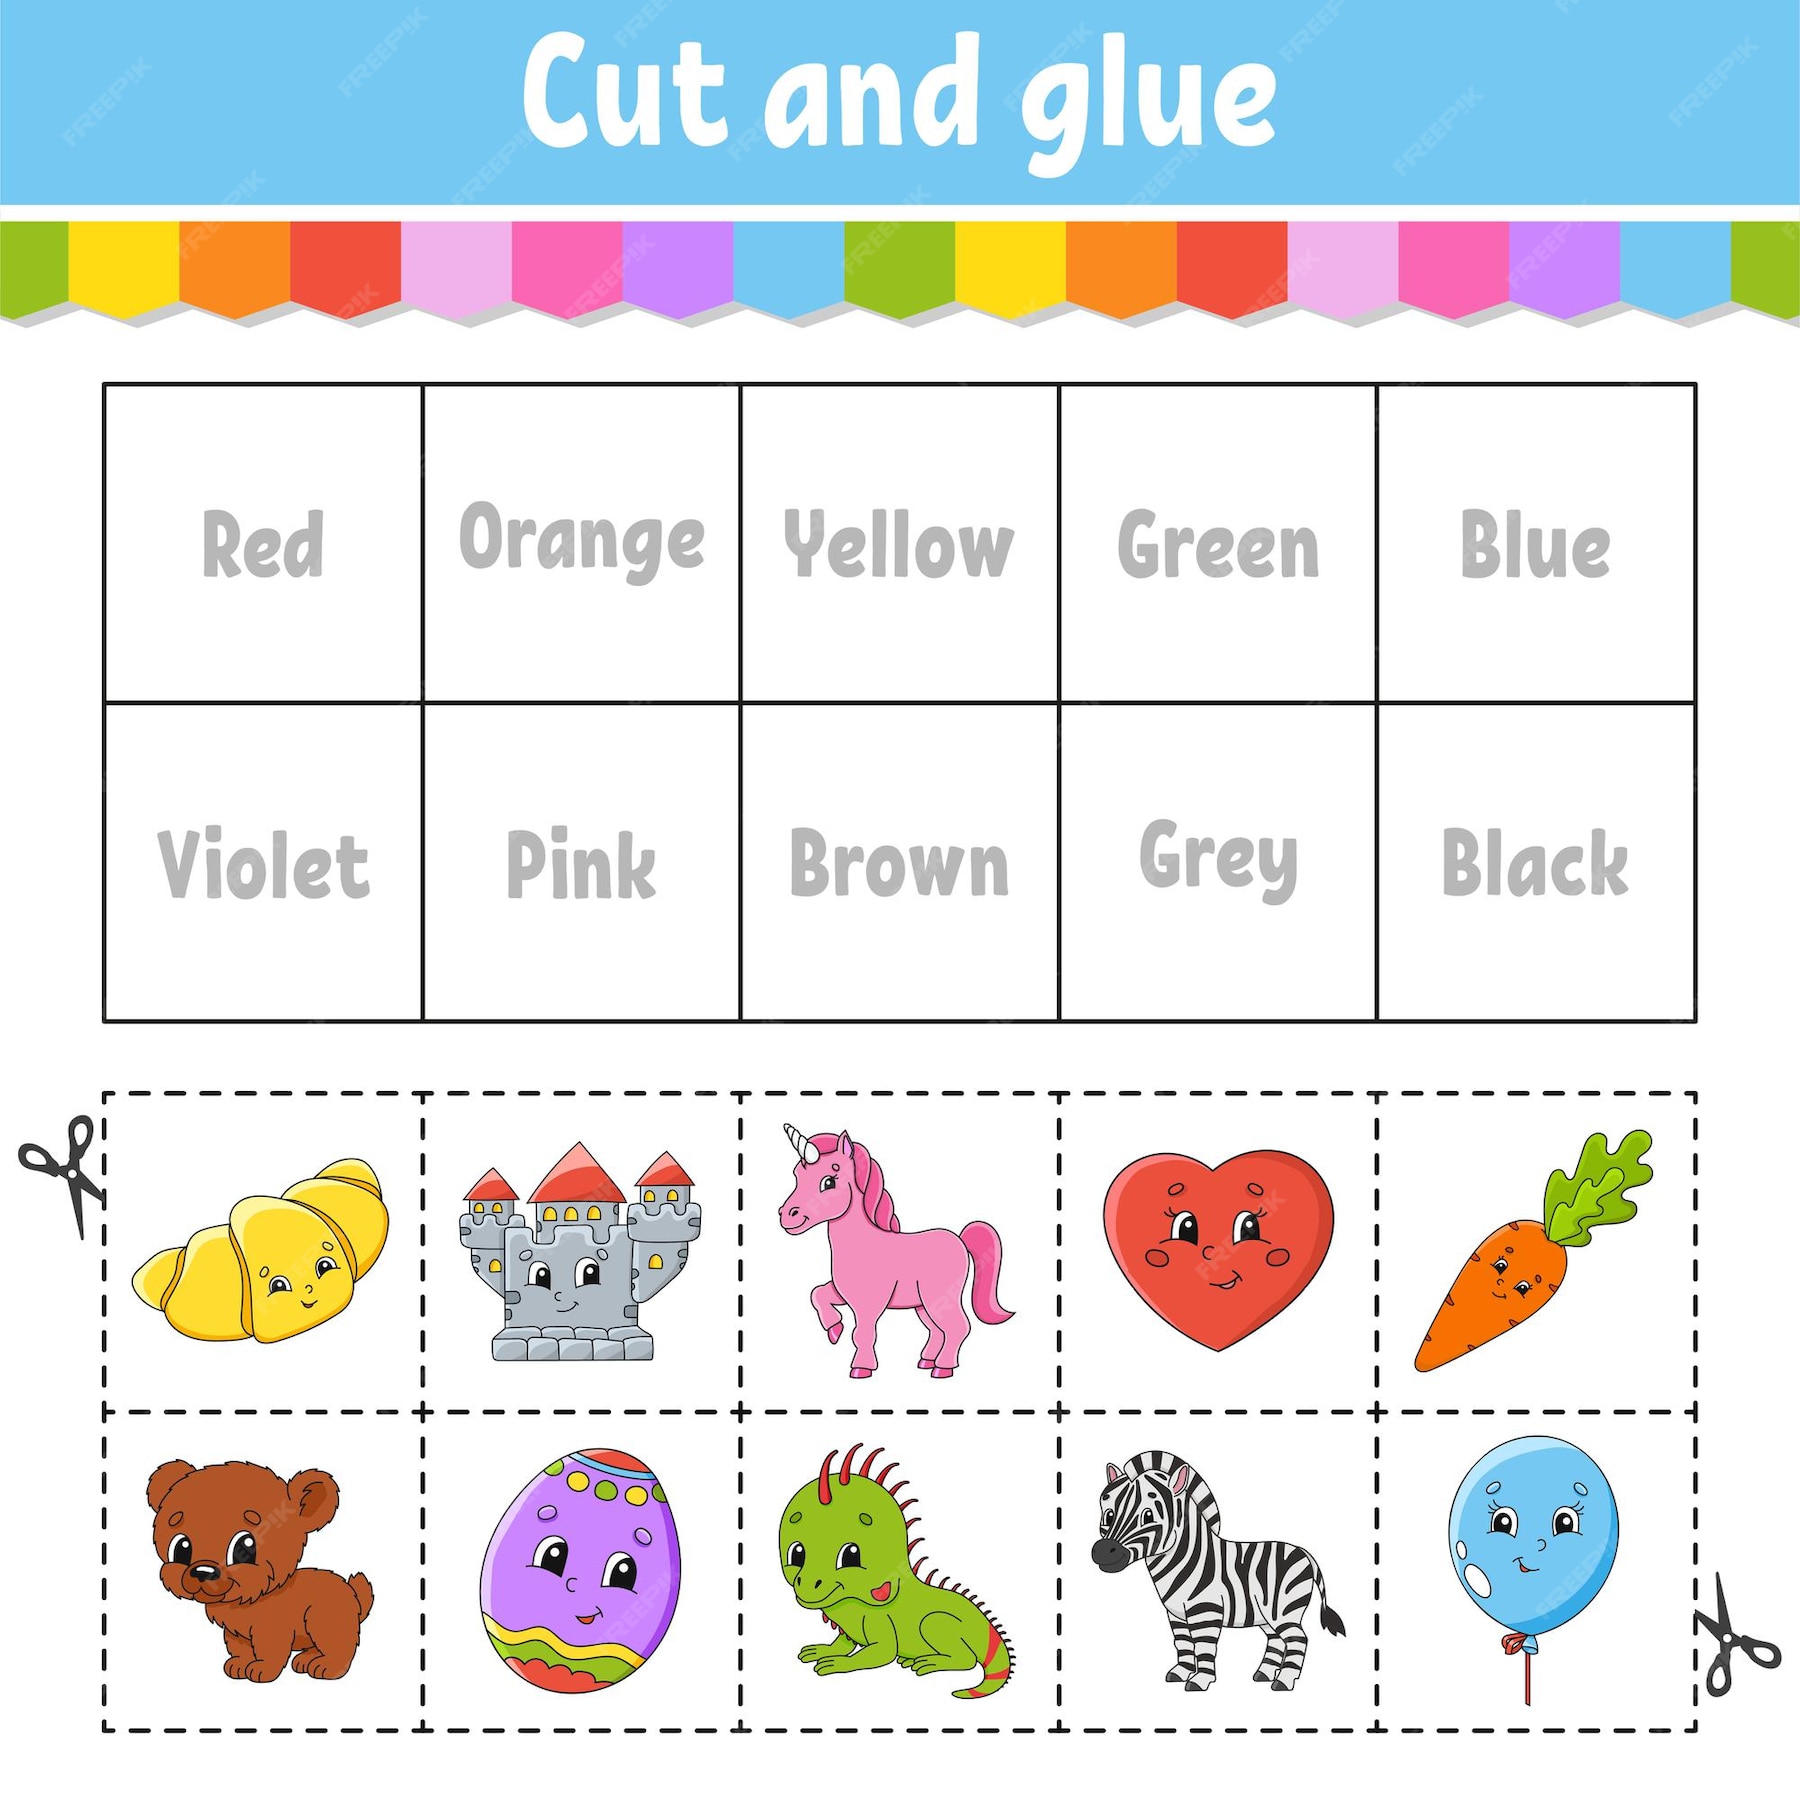 premium-vector-cut-and-glue-color-activity-worksheet-for-kids